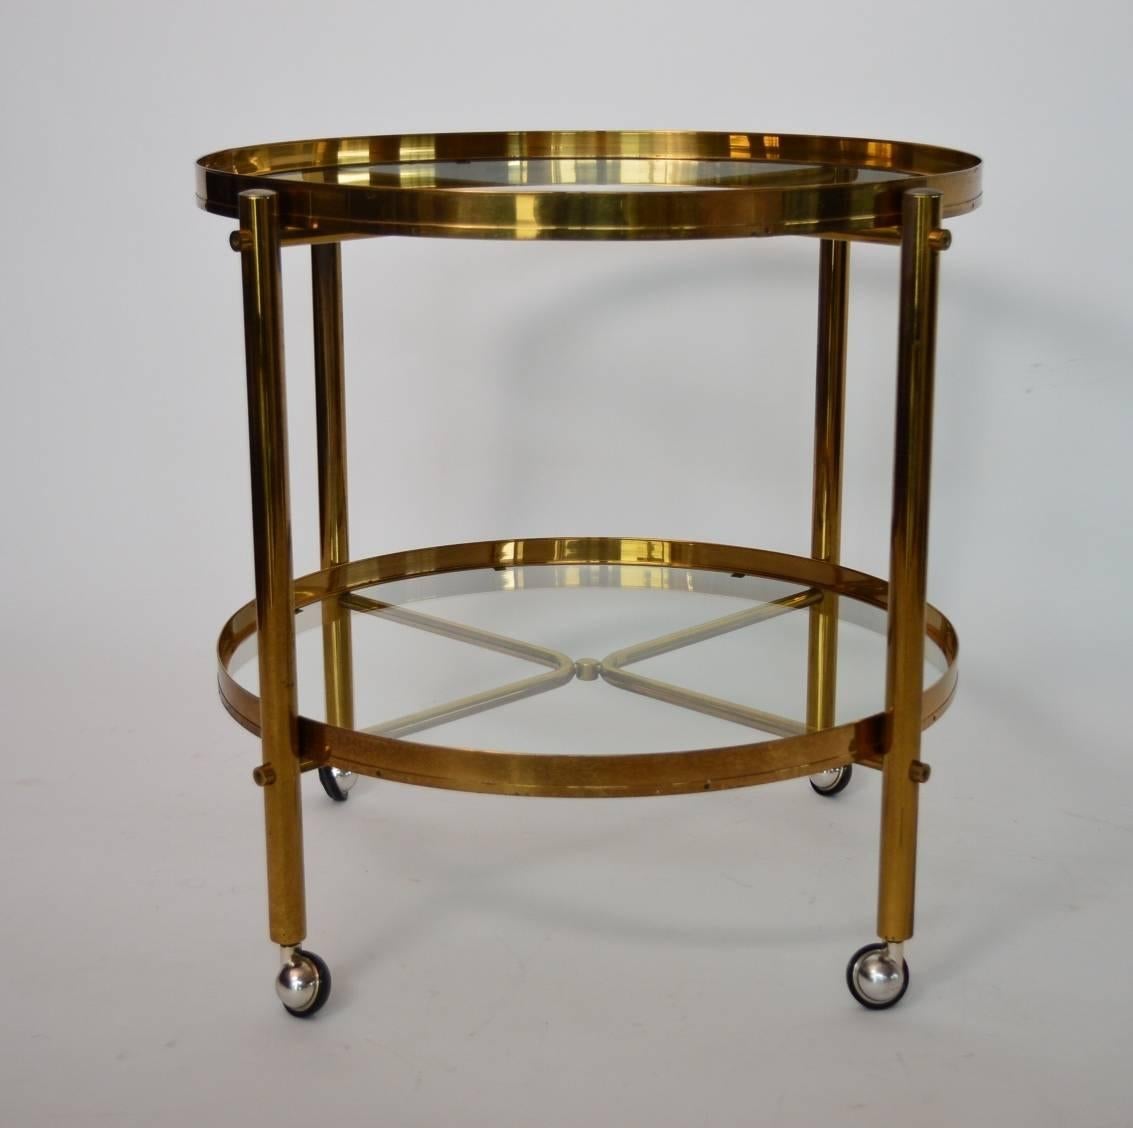 Beautiful Regency-style Italian serving trolley or bar cart from the 1960s with four wheels.
The two trays are made of glass with a beautiful brass frame with stunning patina. The upper tray is removable.
The legs are made of gilded metal.
The